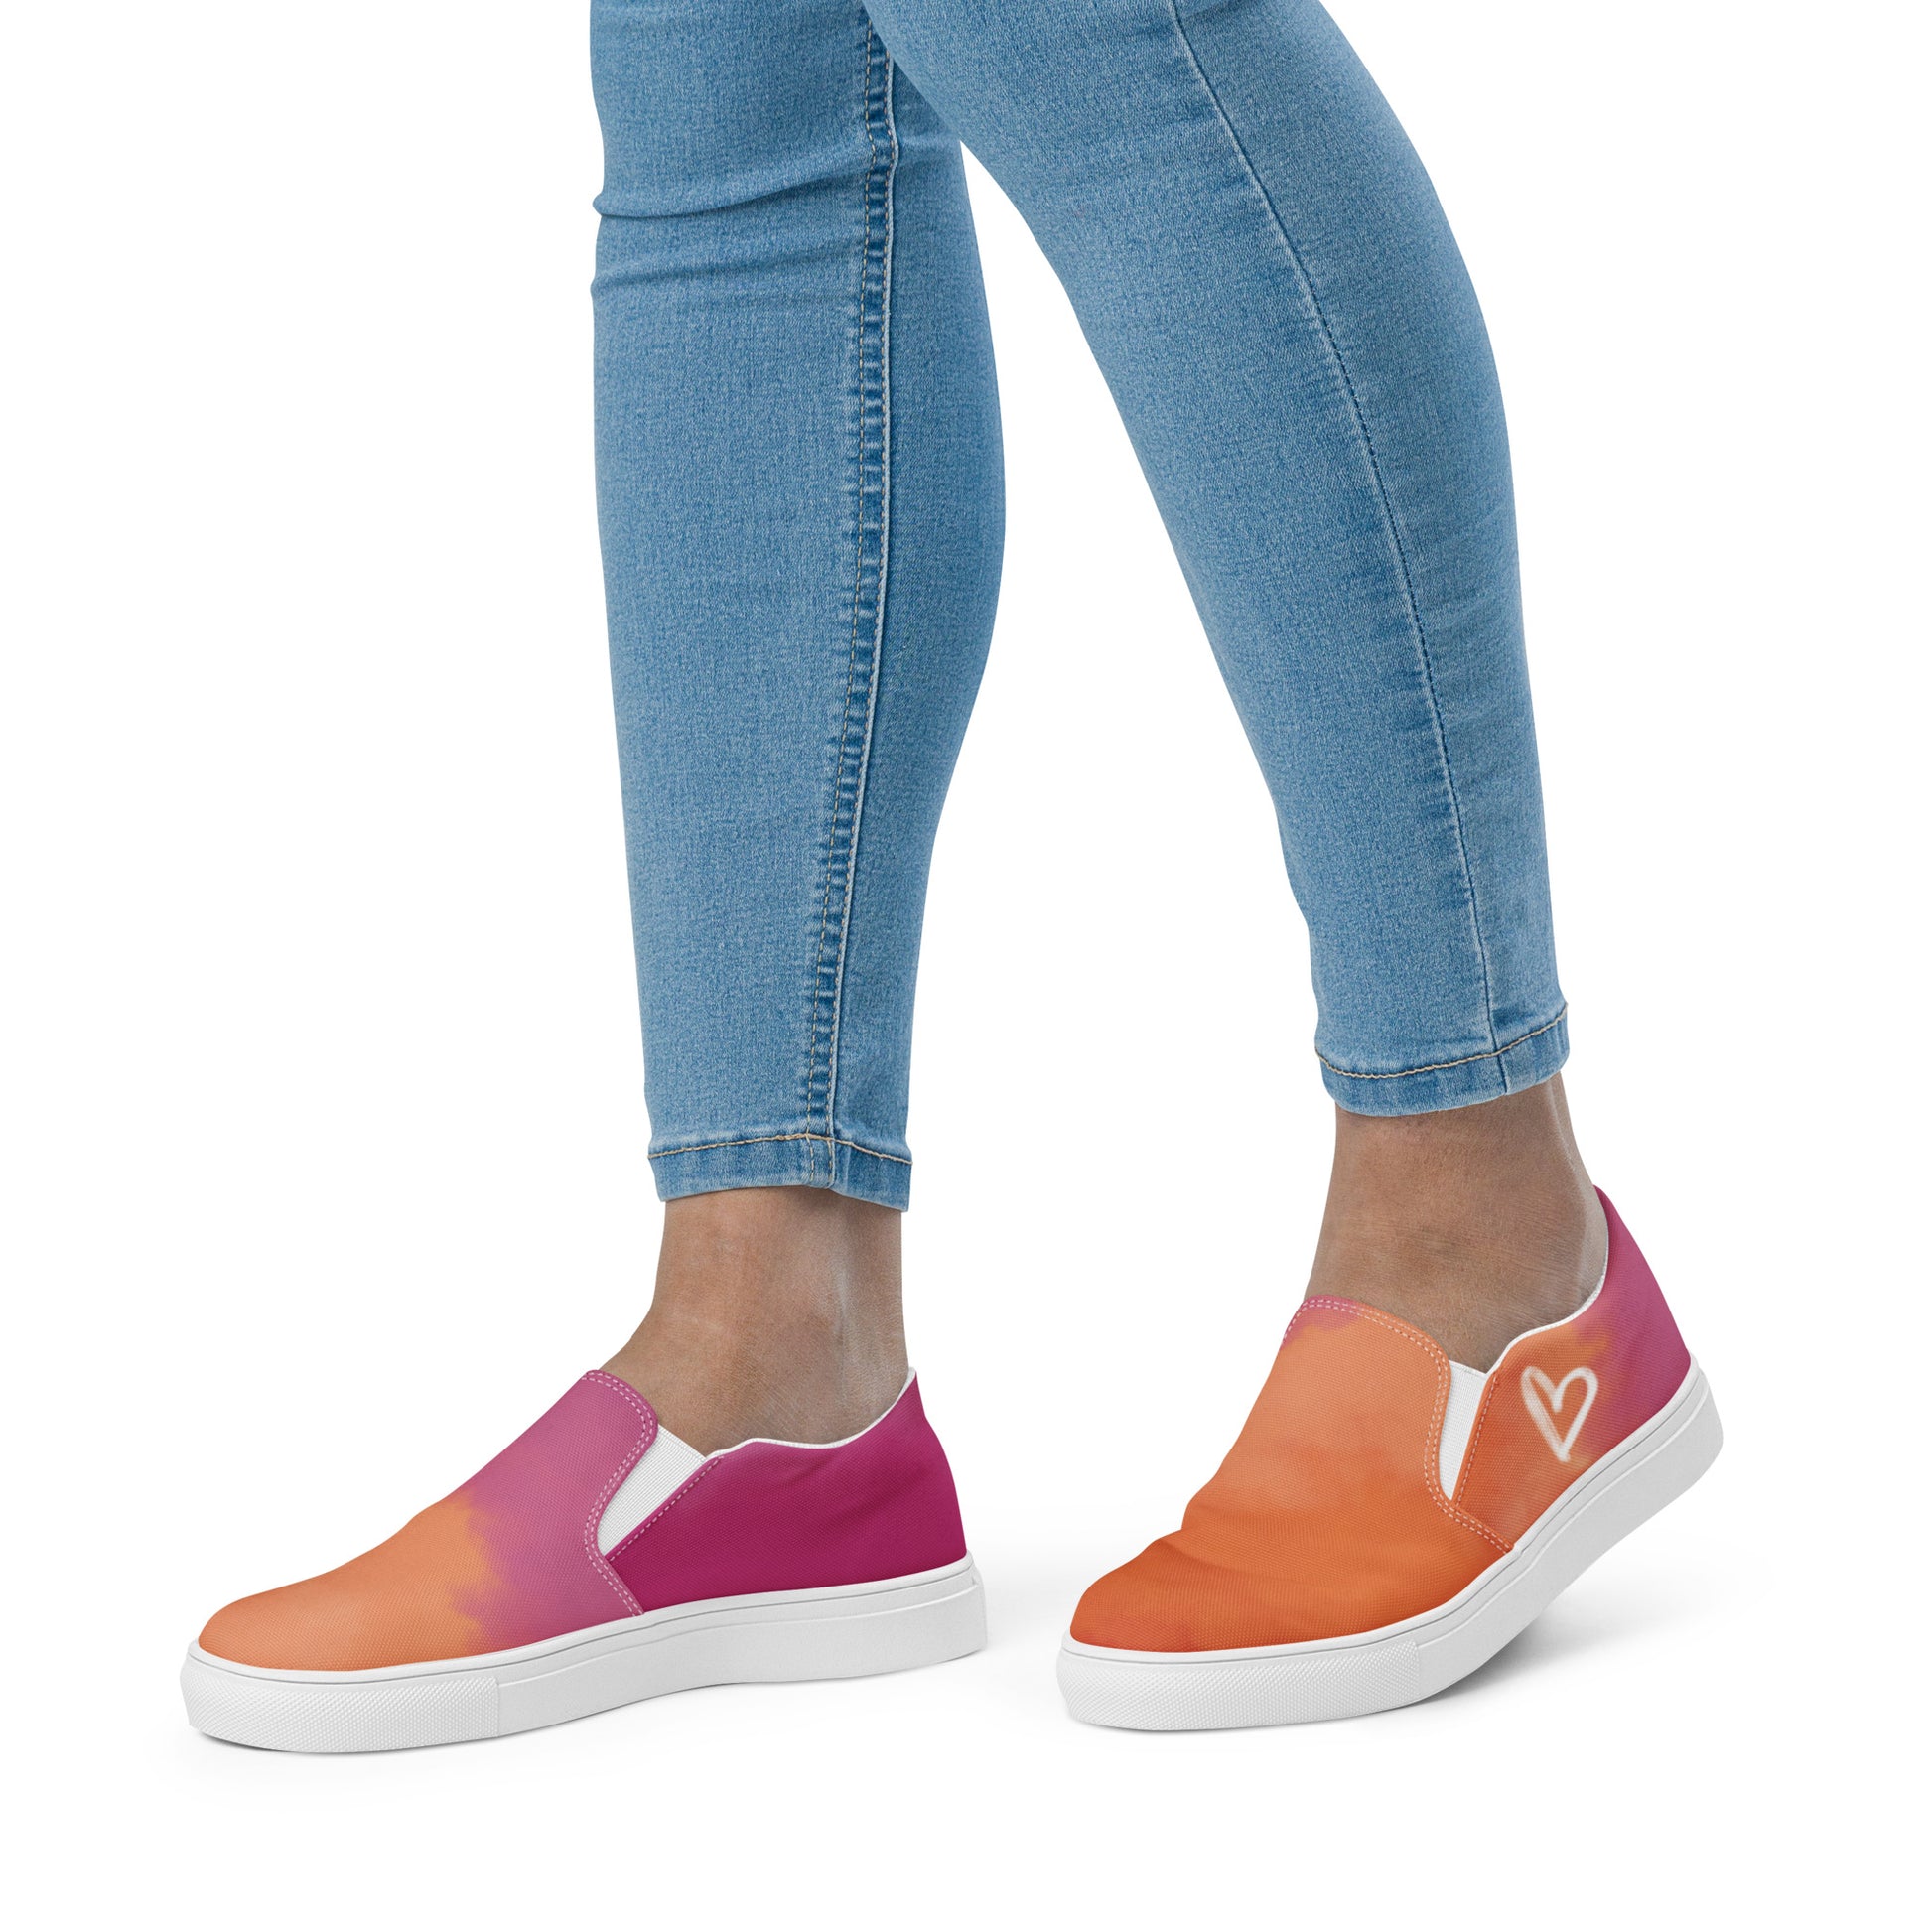 Left view: A model wears a pair of slip on canvas shoes with the colors of the lesbian pride flag in a cloudy texture, a white heart on the side, and the Aras Sivad logo on the back.